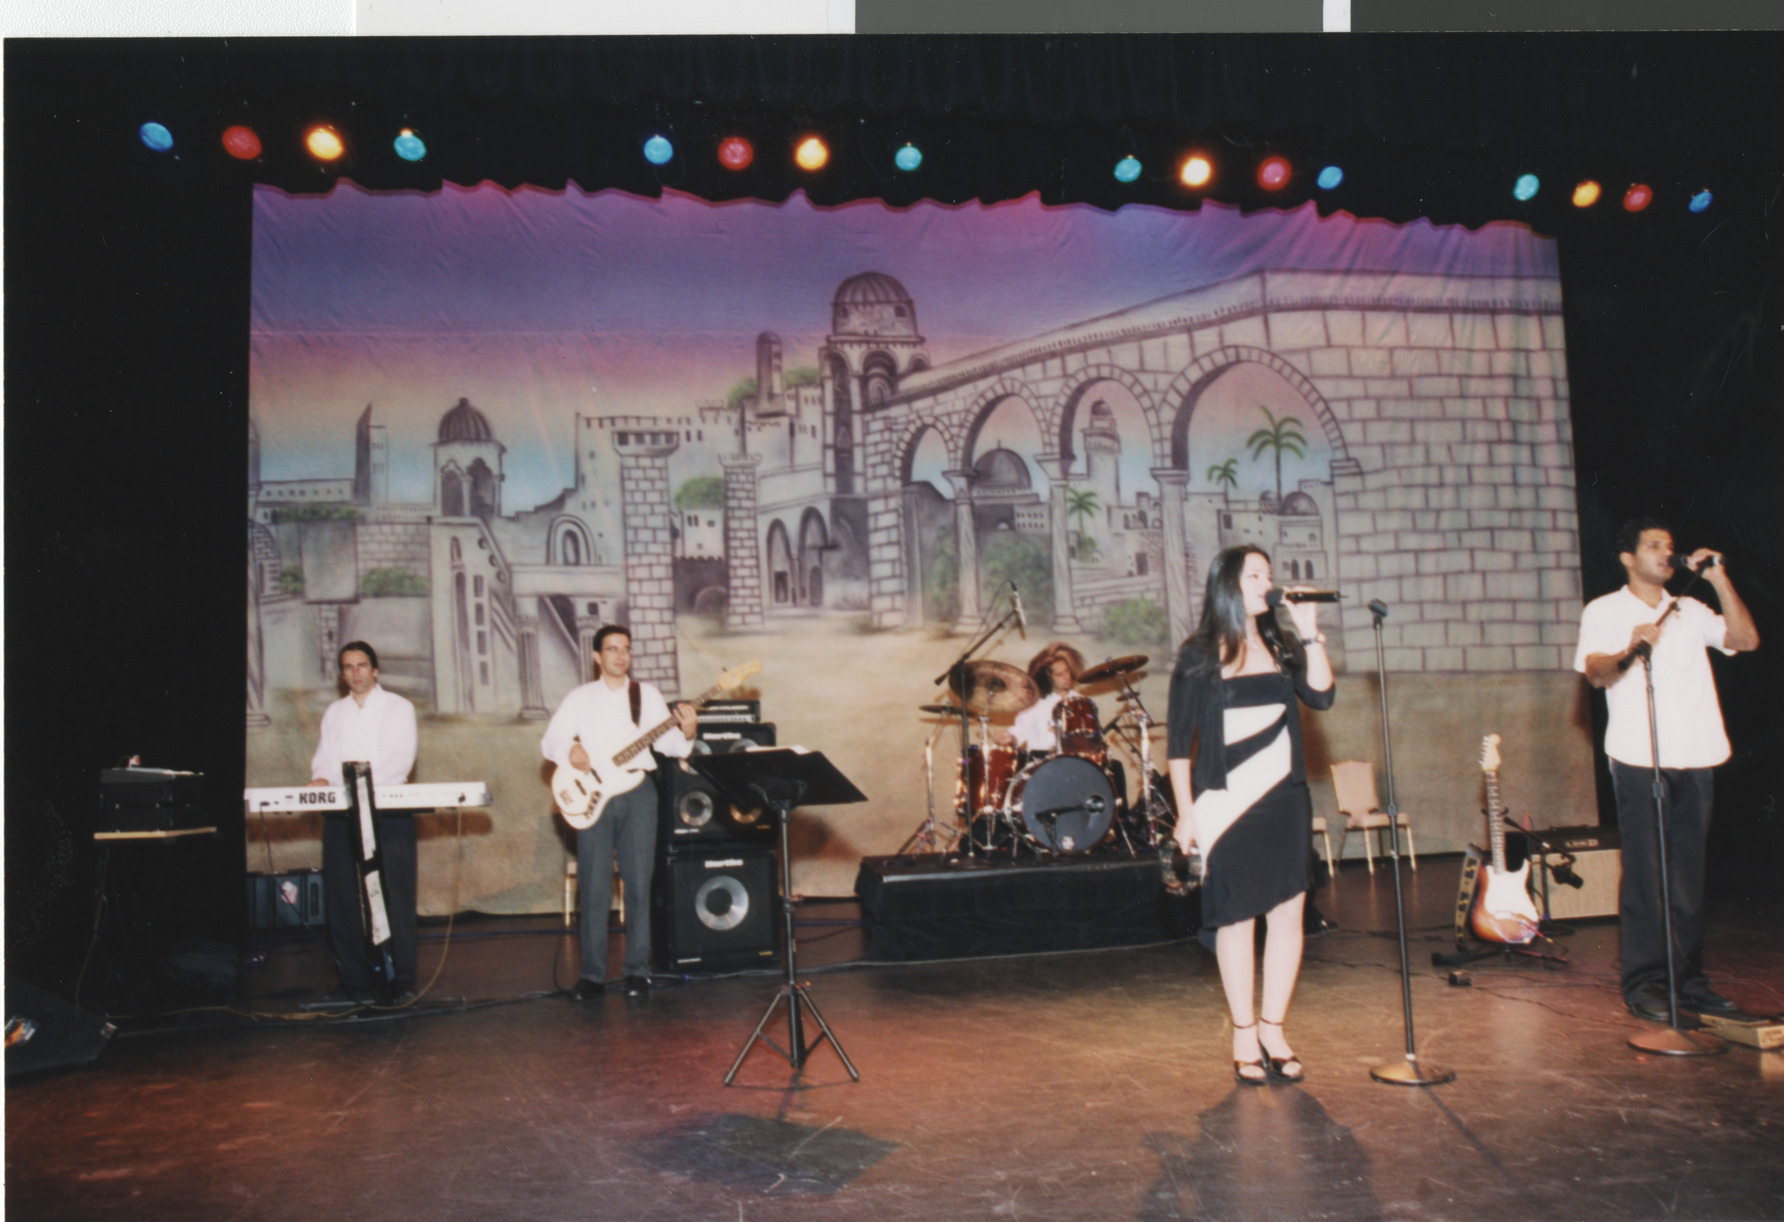 Photograph of performers on stage during Israel Independence Day celebrations, 2004